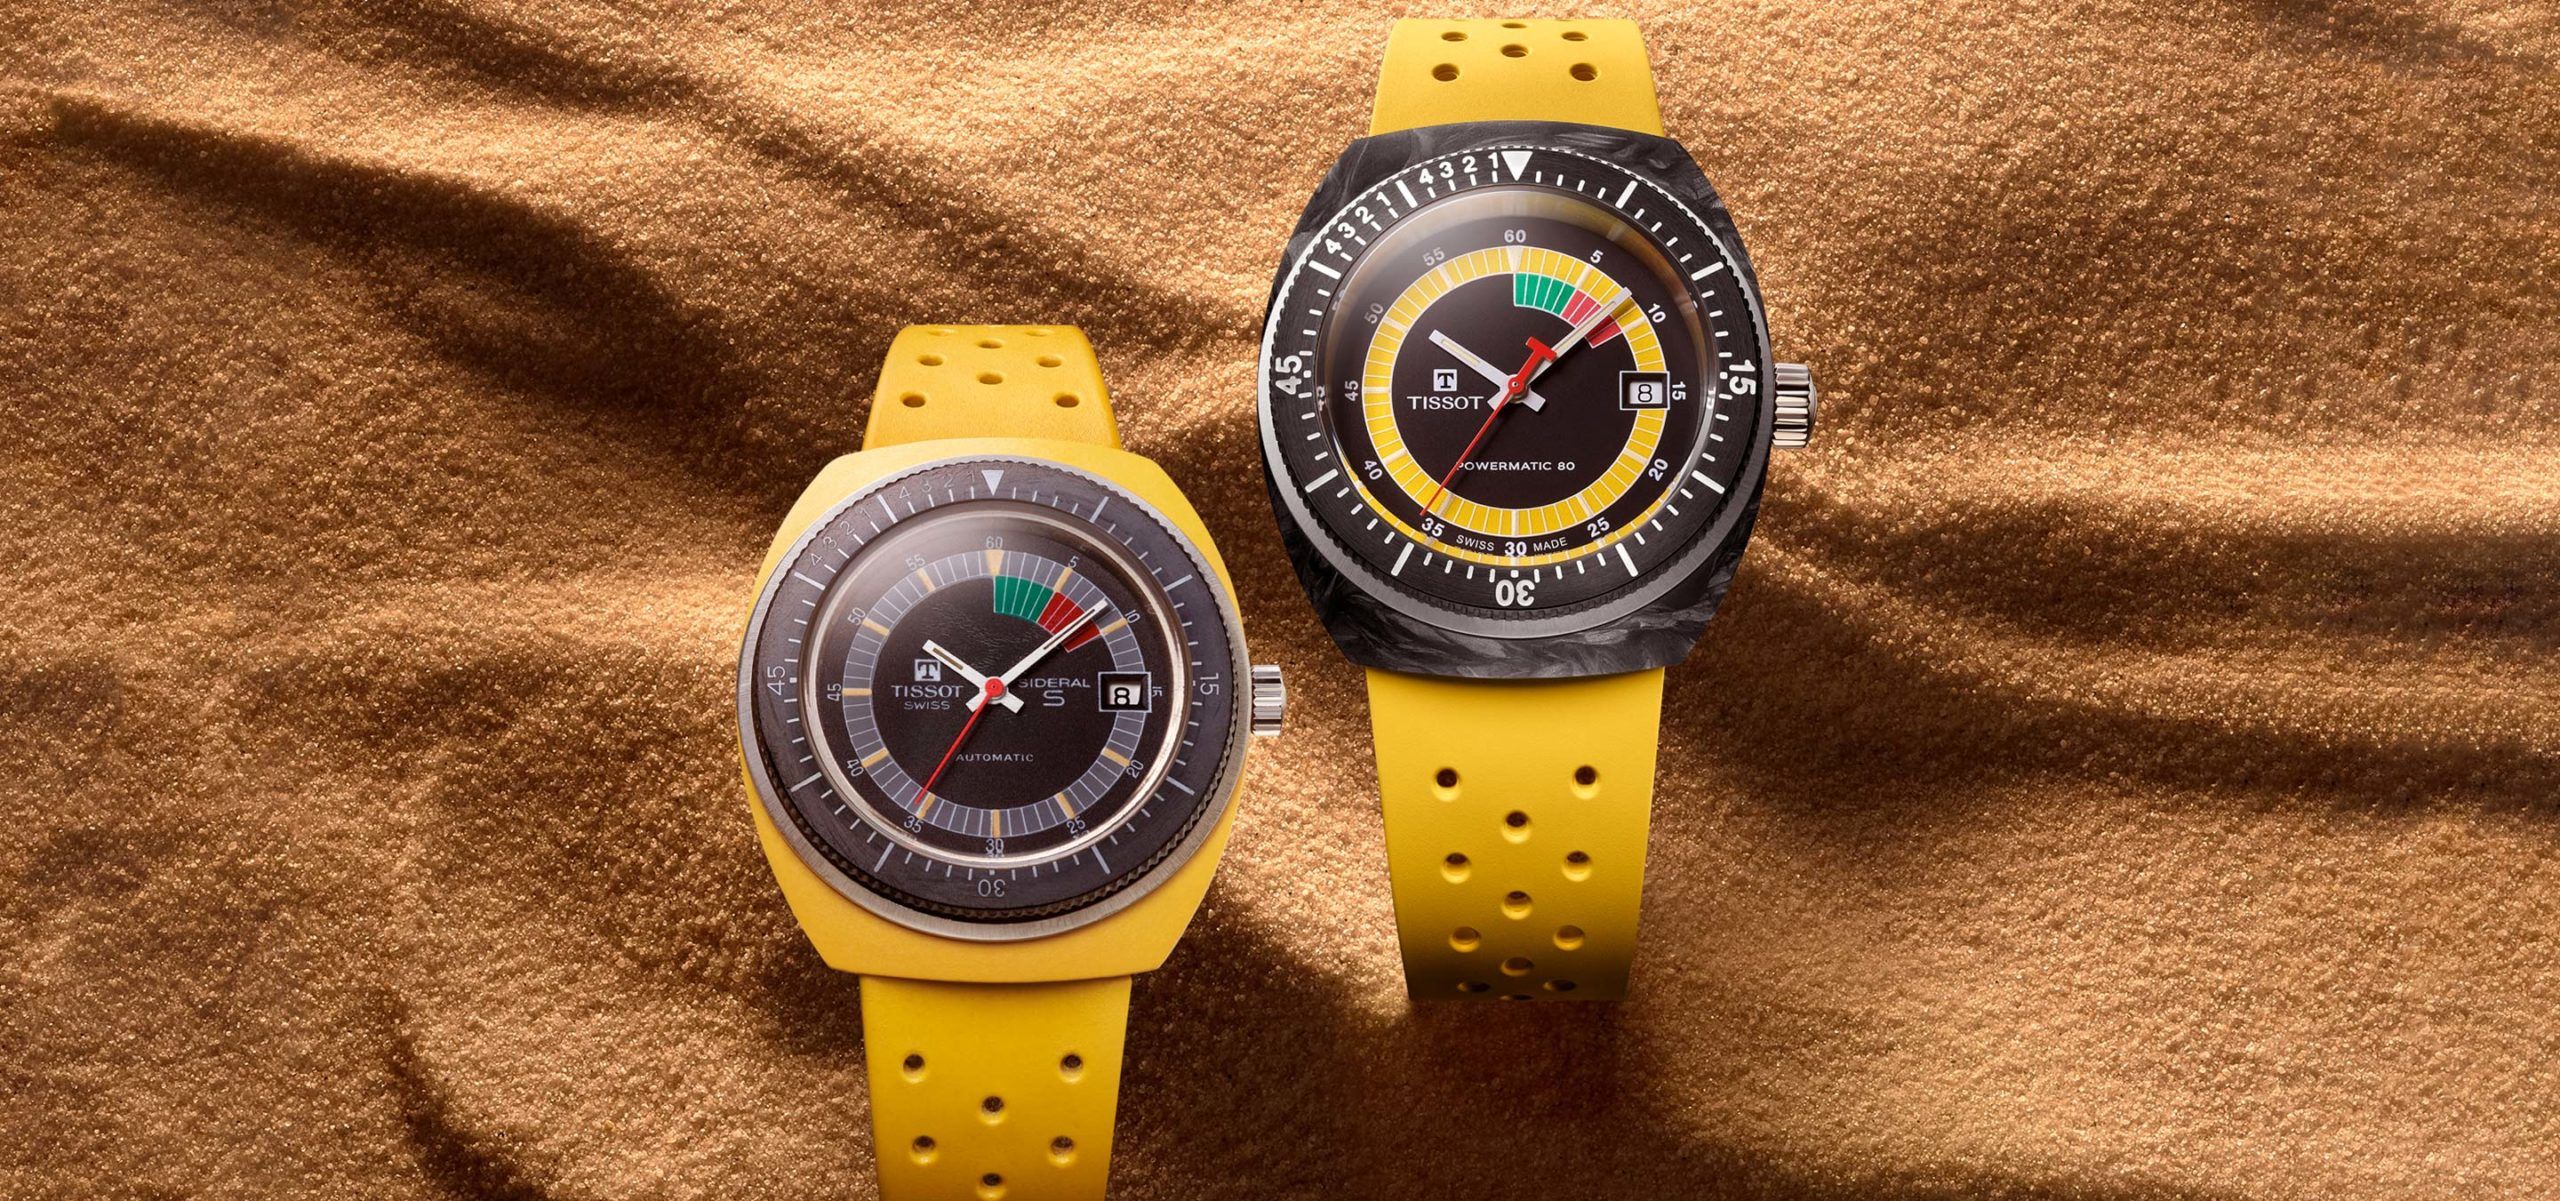 Retro Revival: The Tissot Sideral S Makes A Groovy Summer Comeback